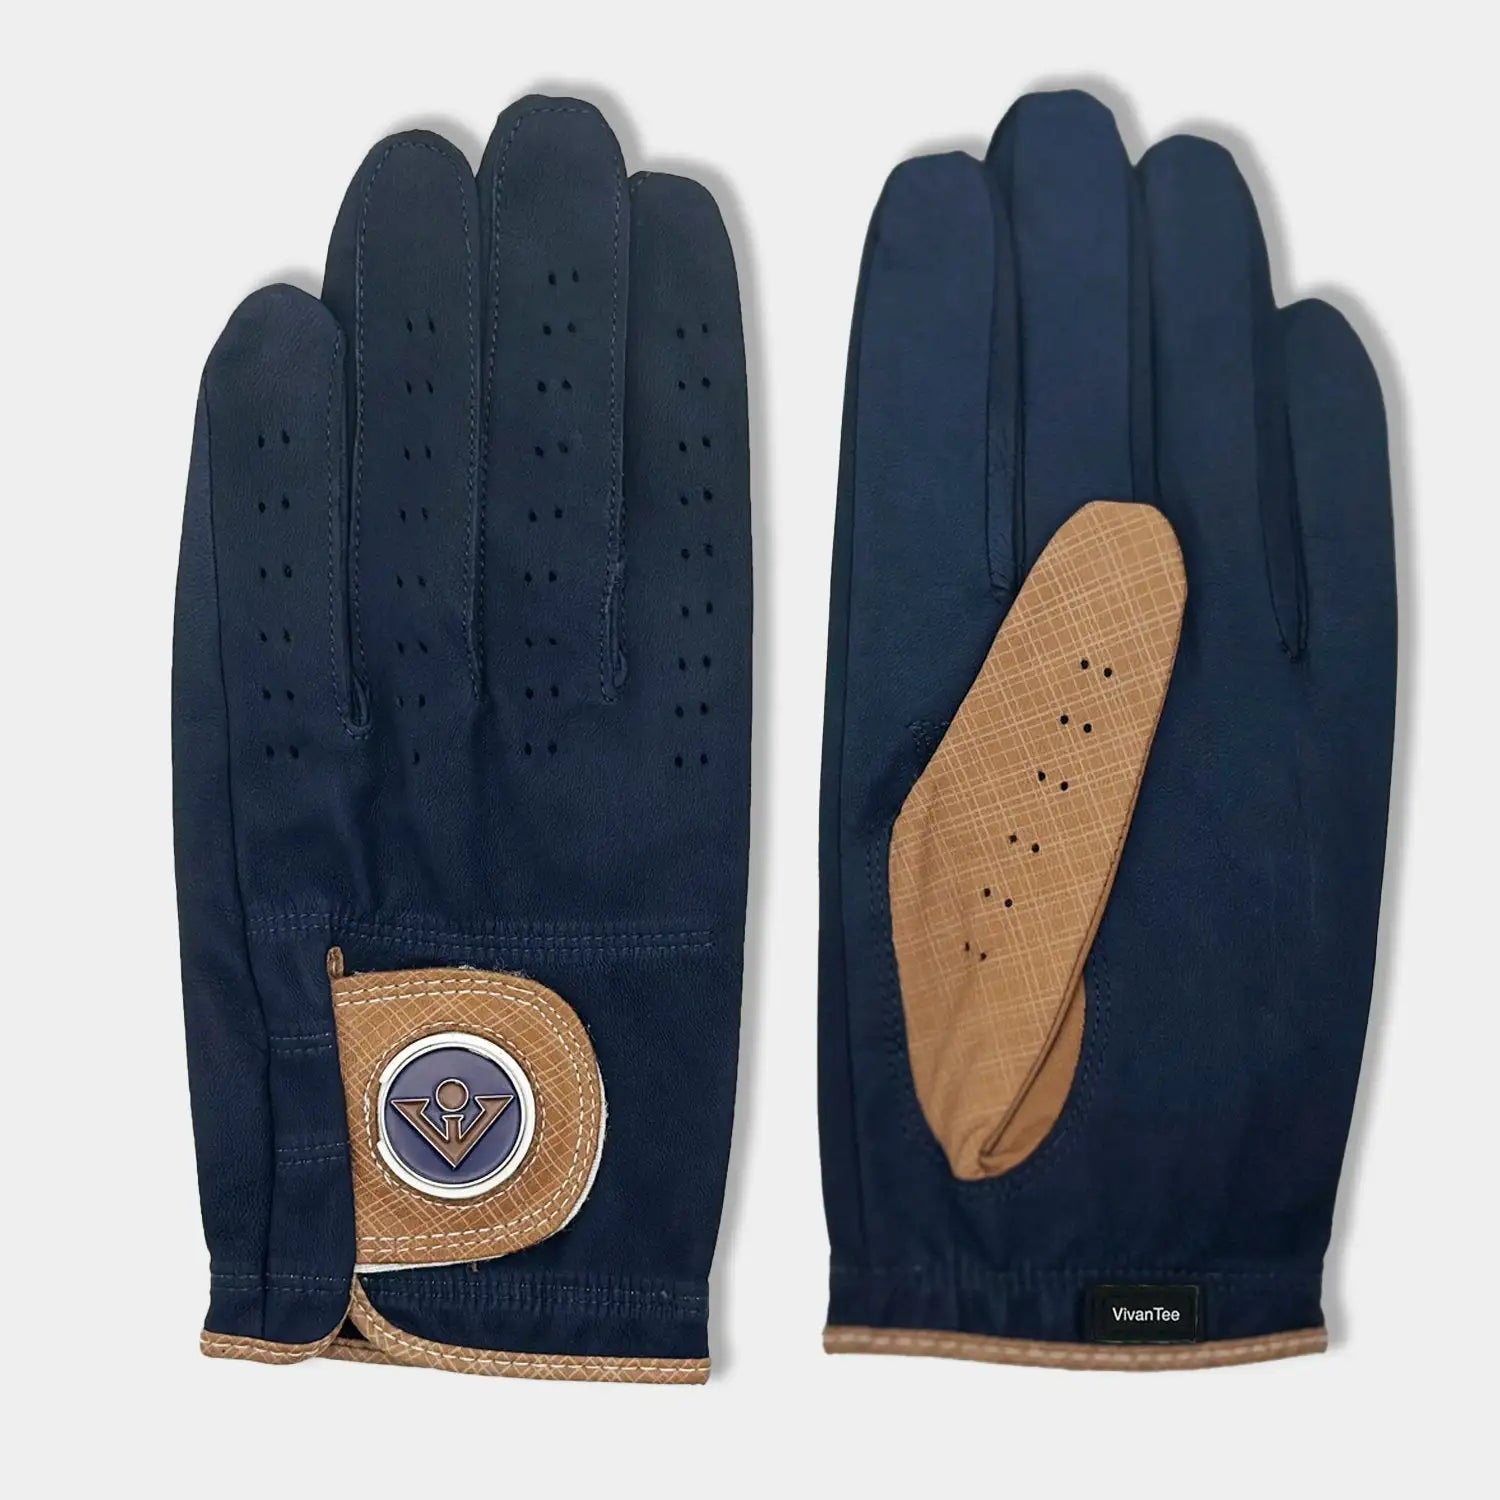 Navy blue and brown golf gloves for men with ball markers, picture taken of gloves laying down from over the top.